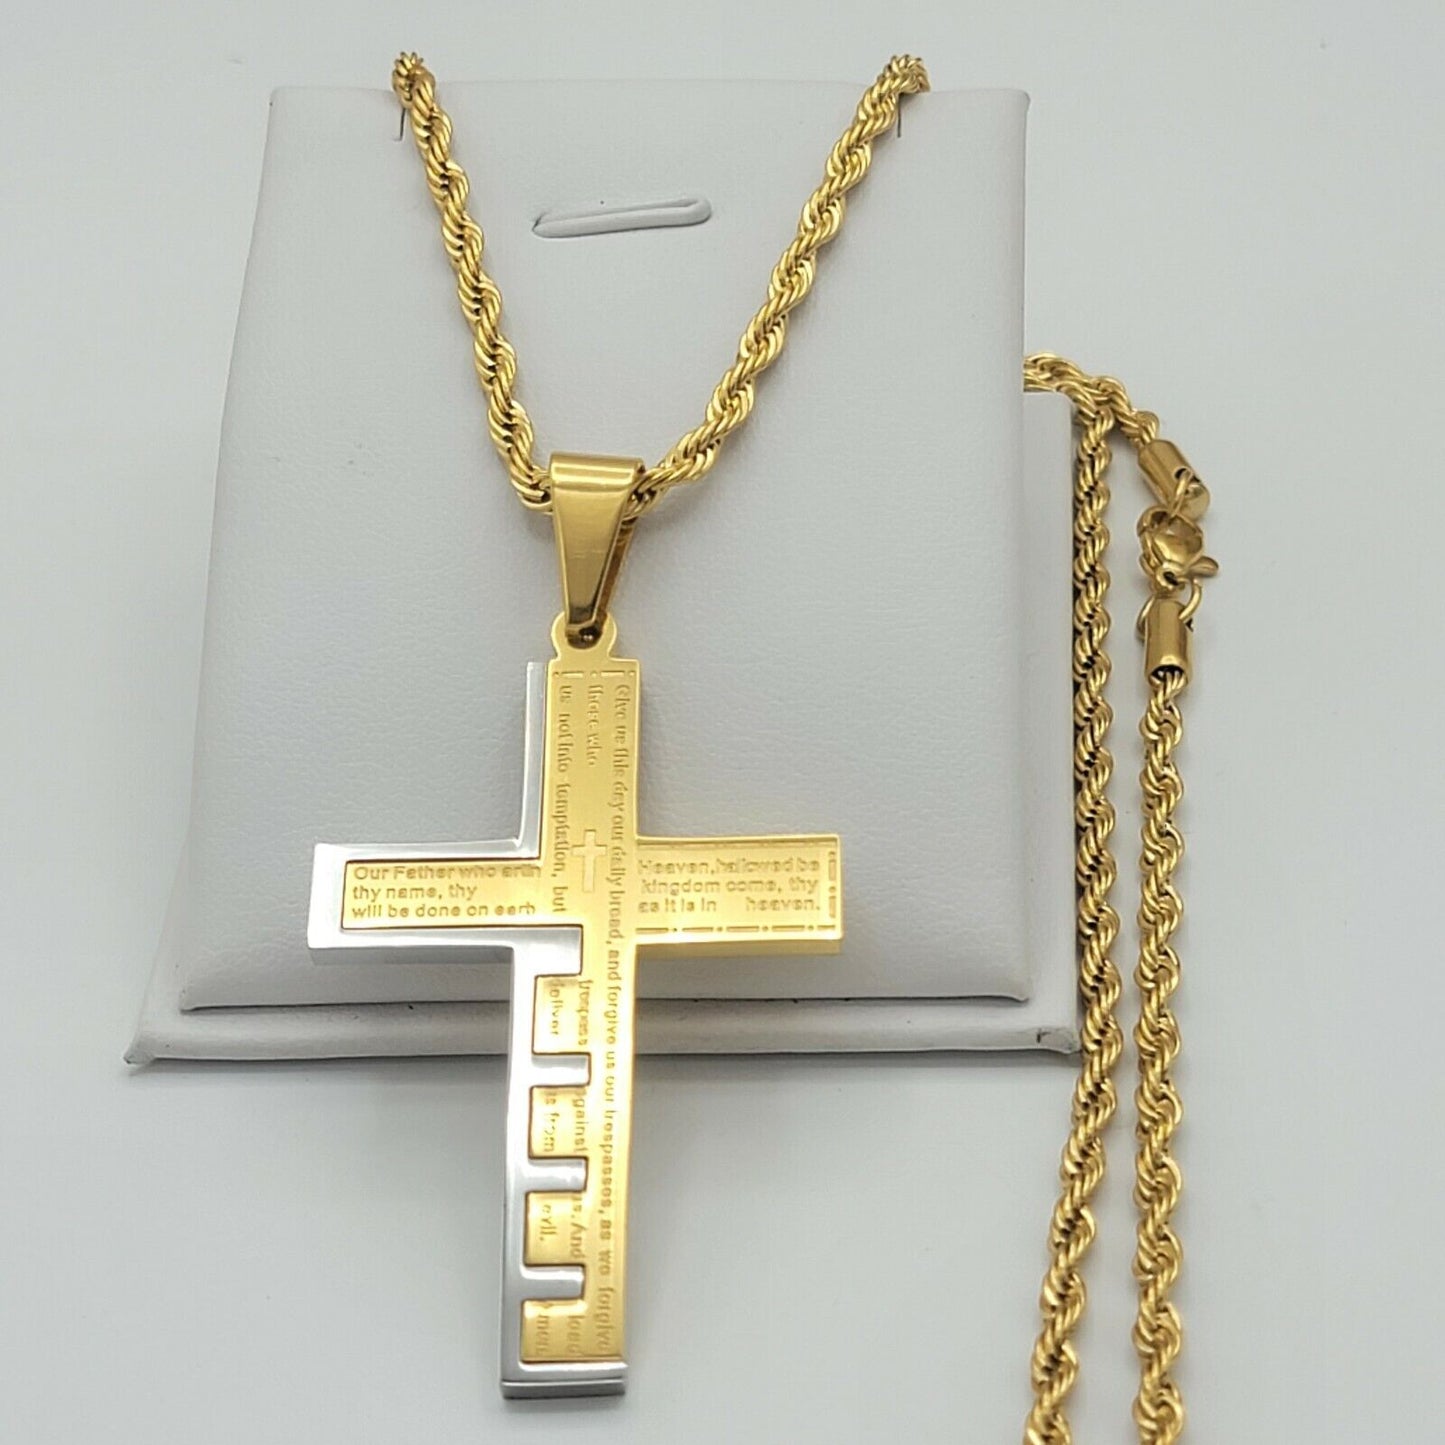 Necklaces - Stainless Steel Gold Plated. Bible Our Father Lord's Prayer Cross Pendant & Chain